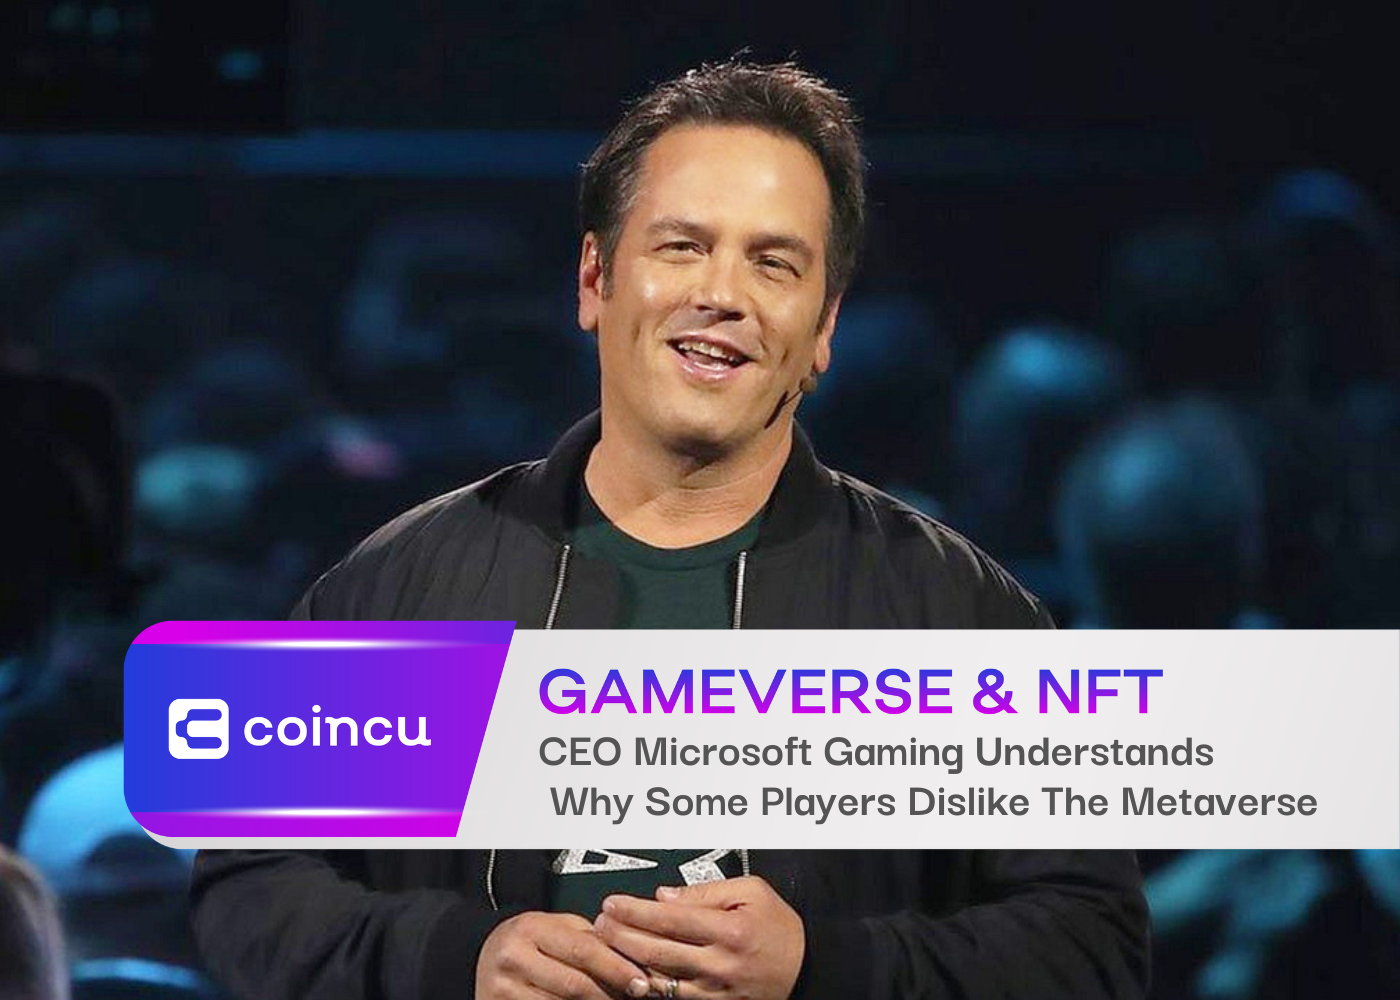 CEO Microsoft Gaming Understands